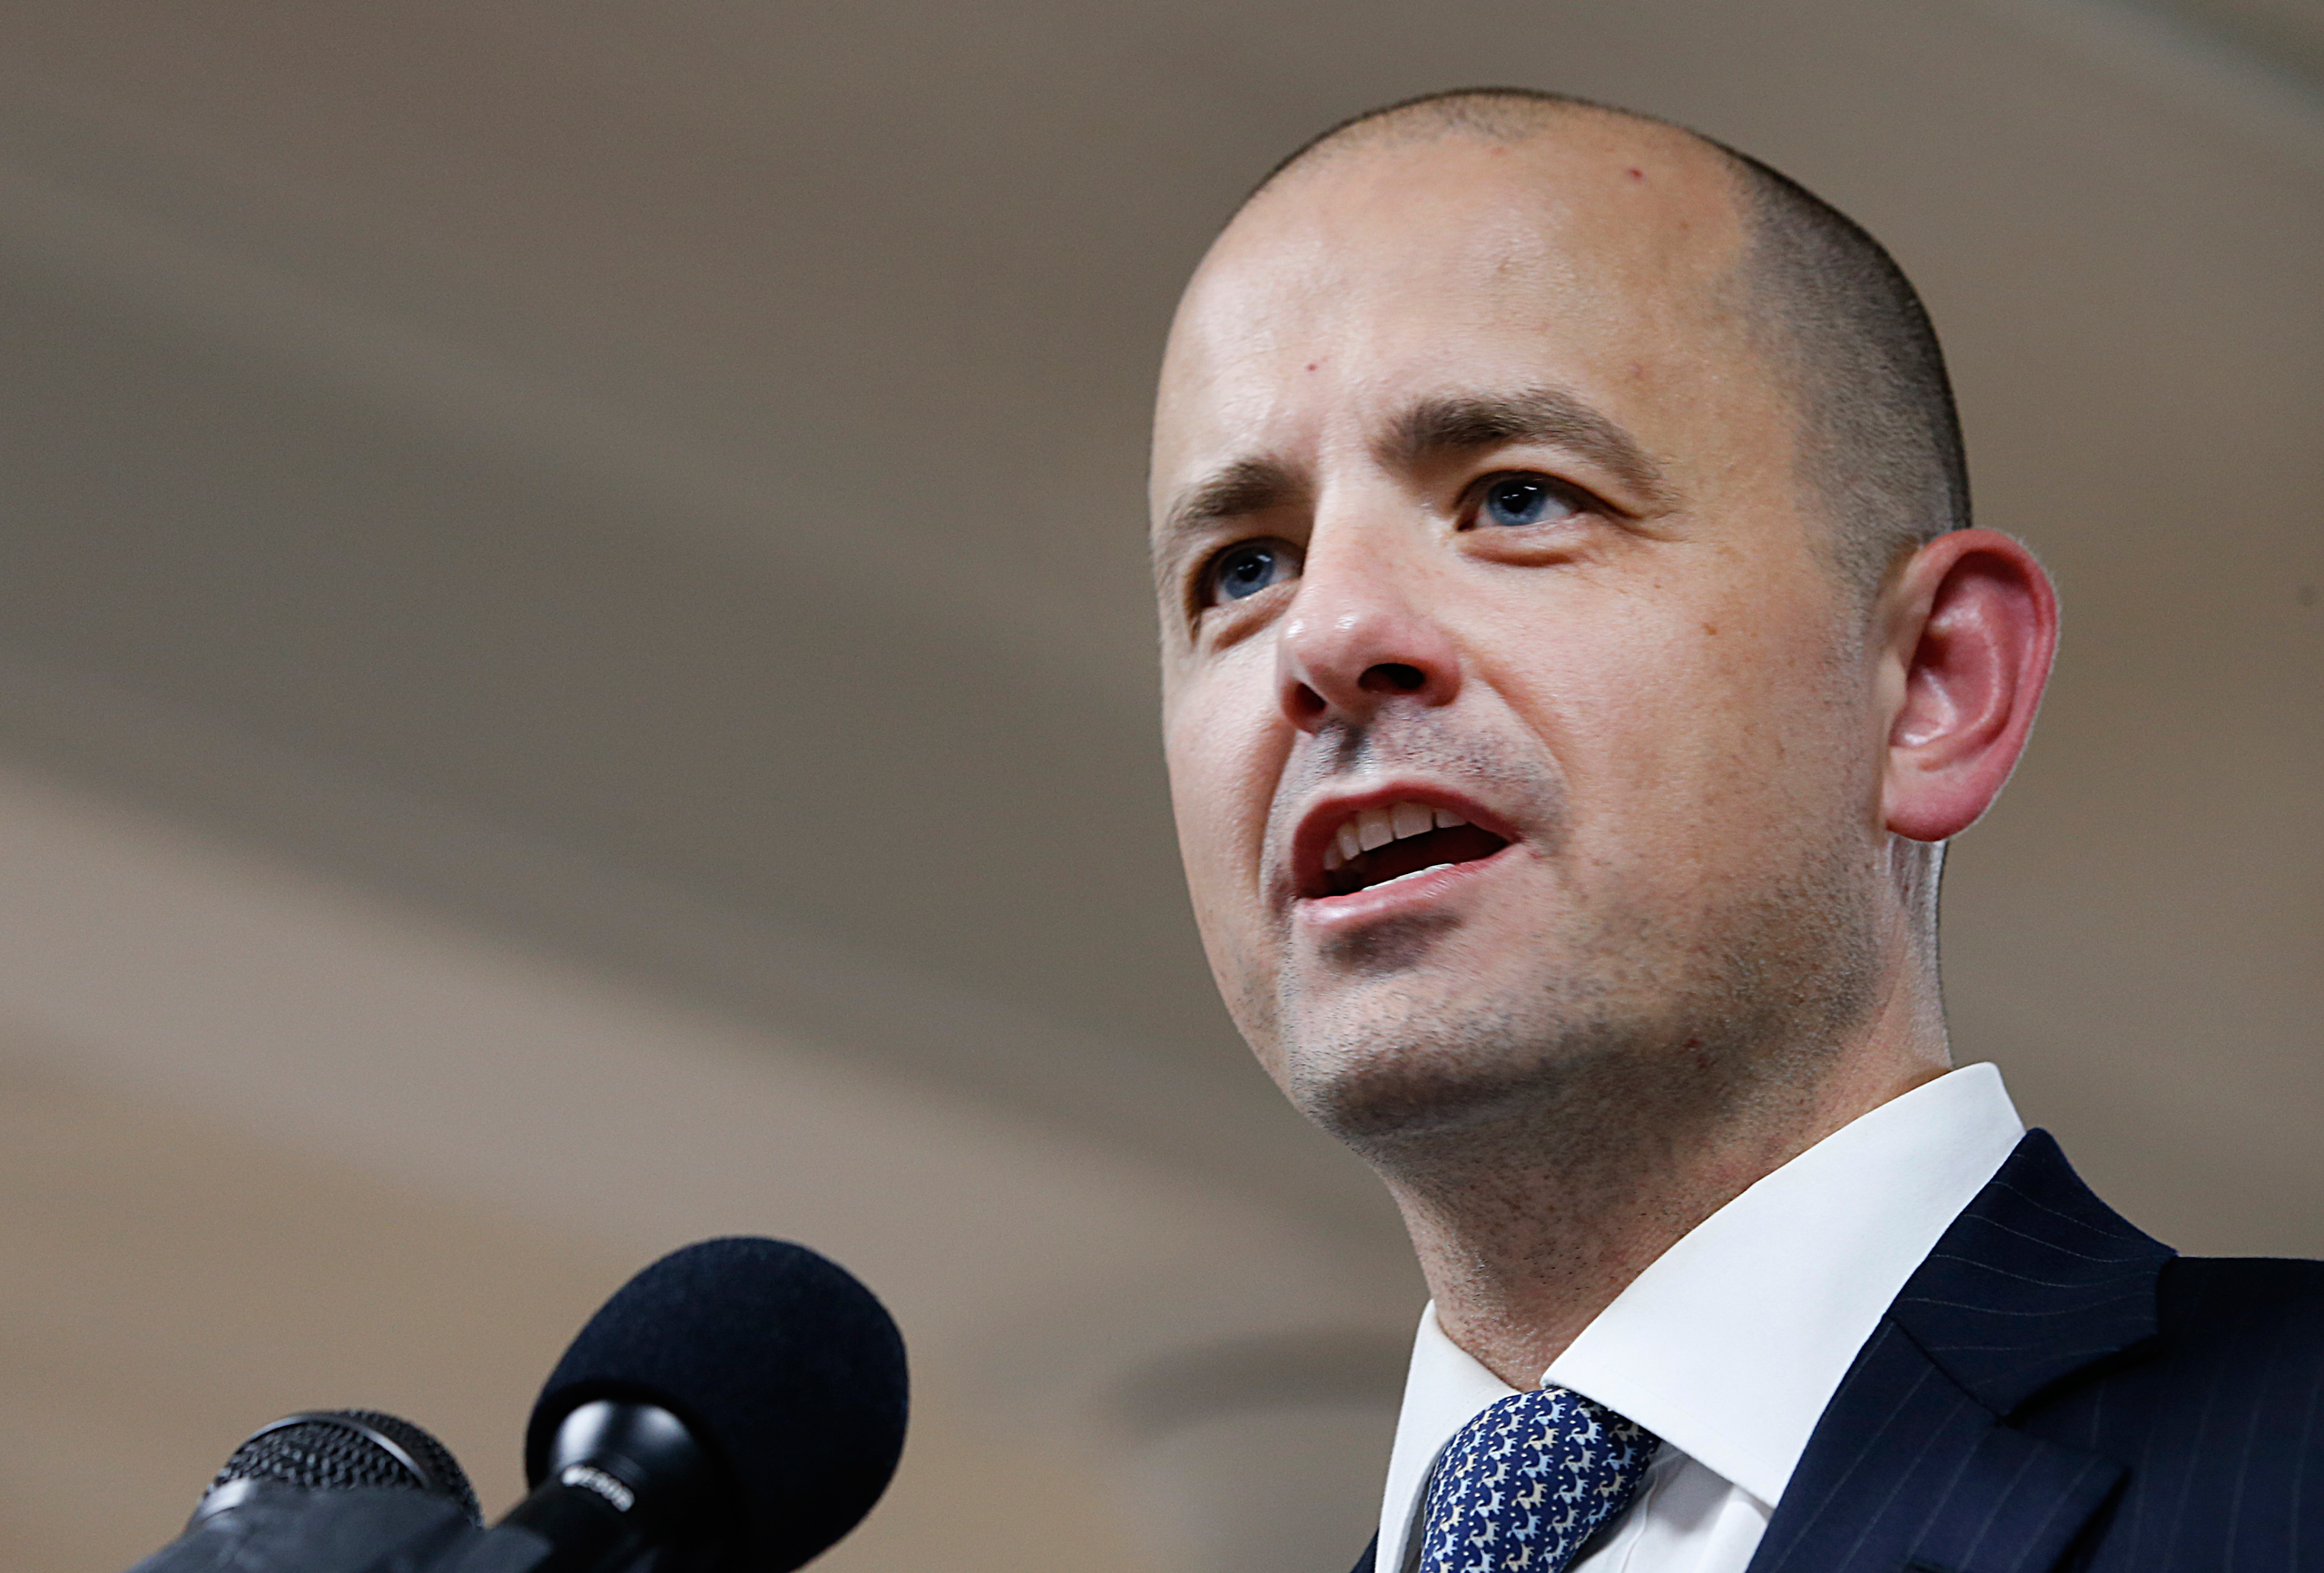 Former CIA agent Evan McMullin announces his presidential campaign as an Independent candidate in Salt Lake City on Aug. 10, 2016. (George Frey—Getty Images)